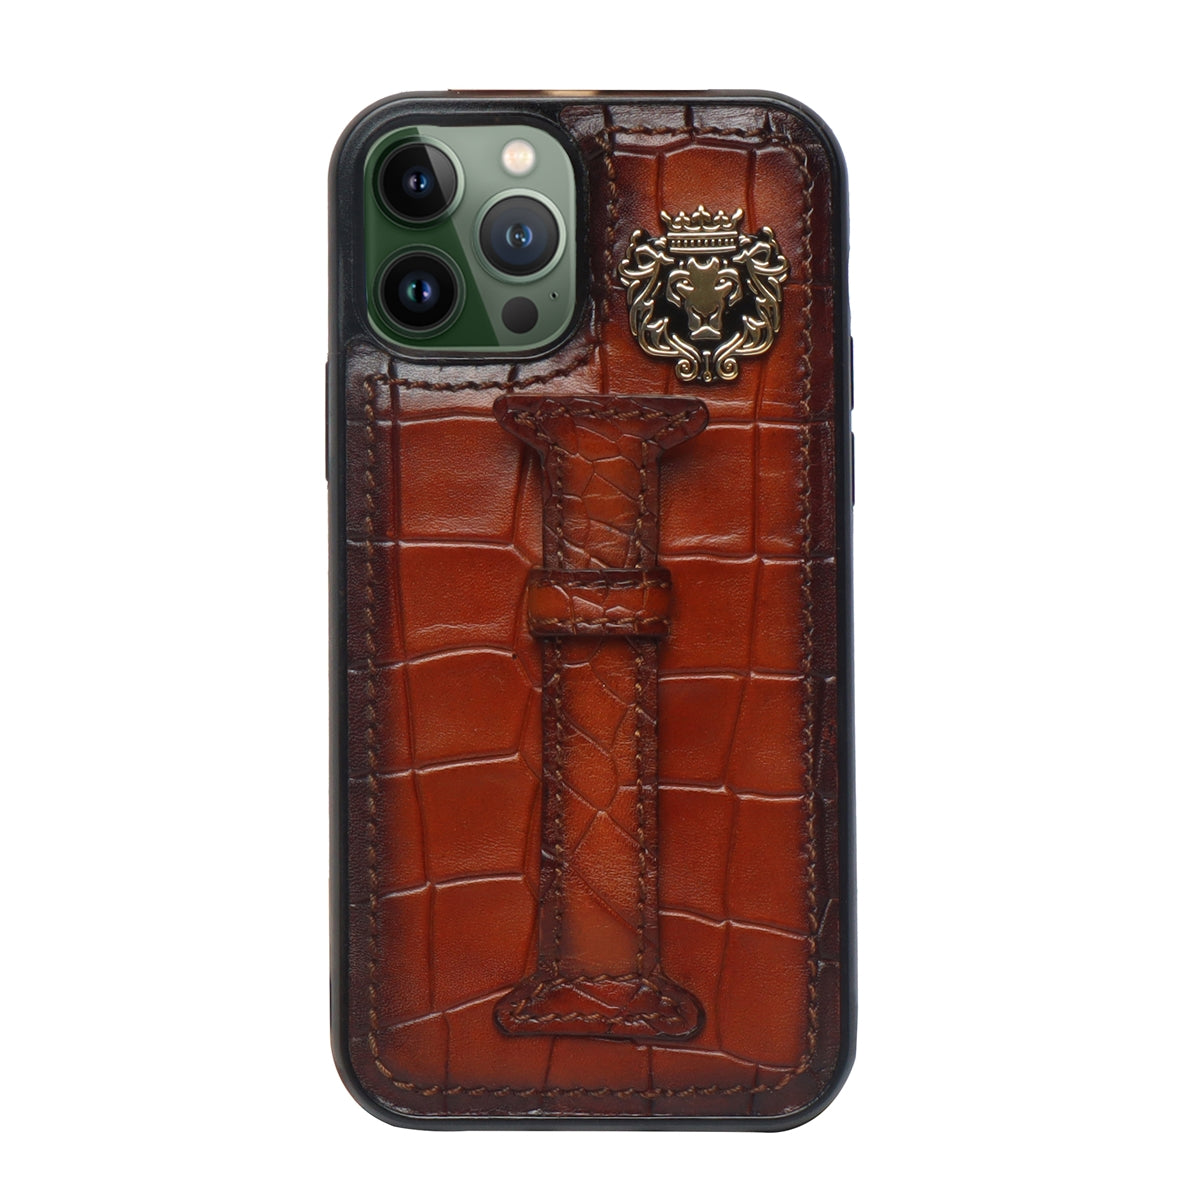 Mobile Cover With Holding Loop In Tan Deep Cut Croco Leather by Brune & Bareskin